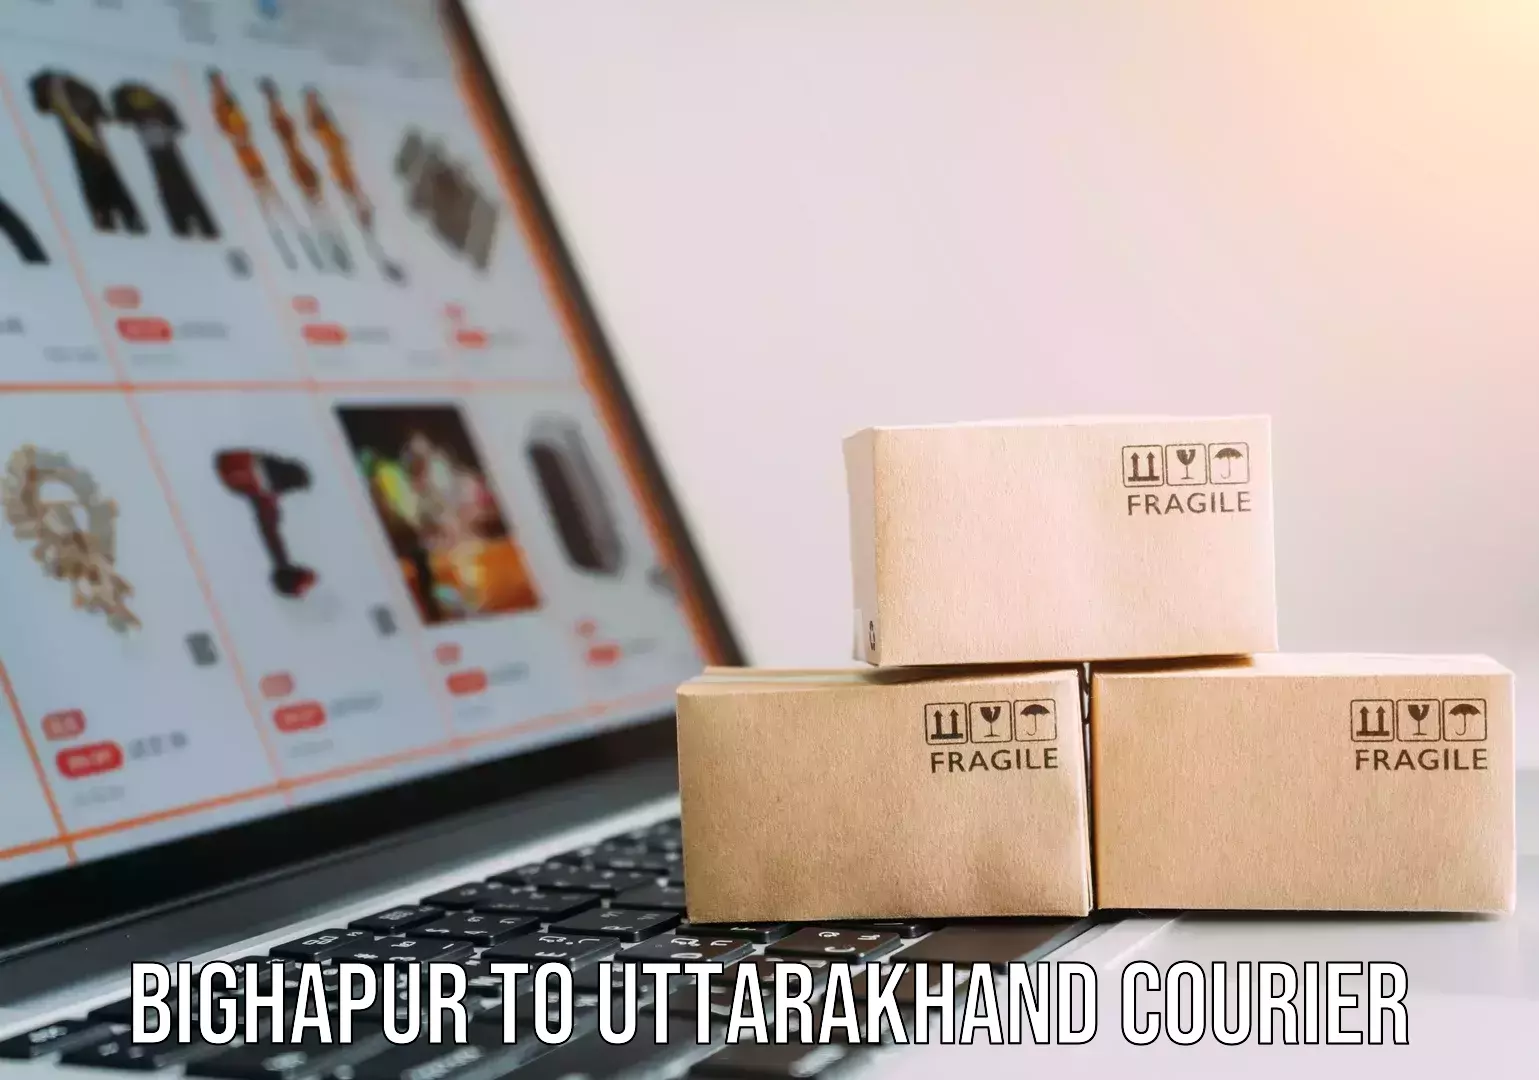 Trackable shipping service Bighapur to Bageshwar